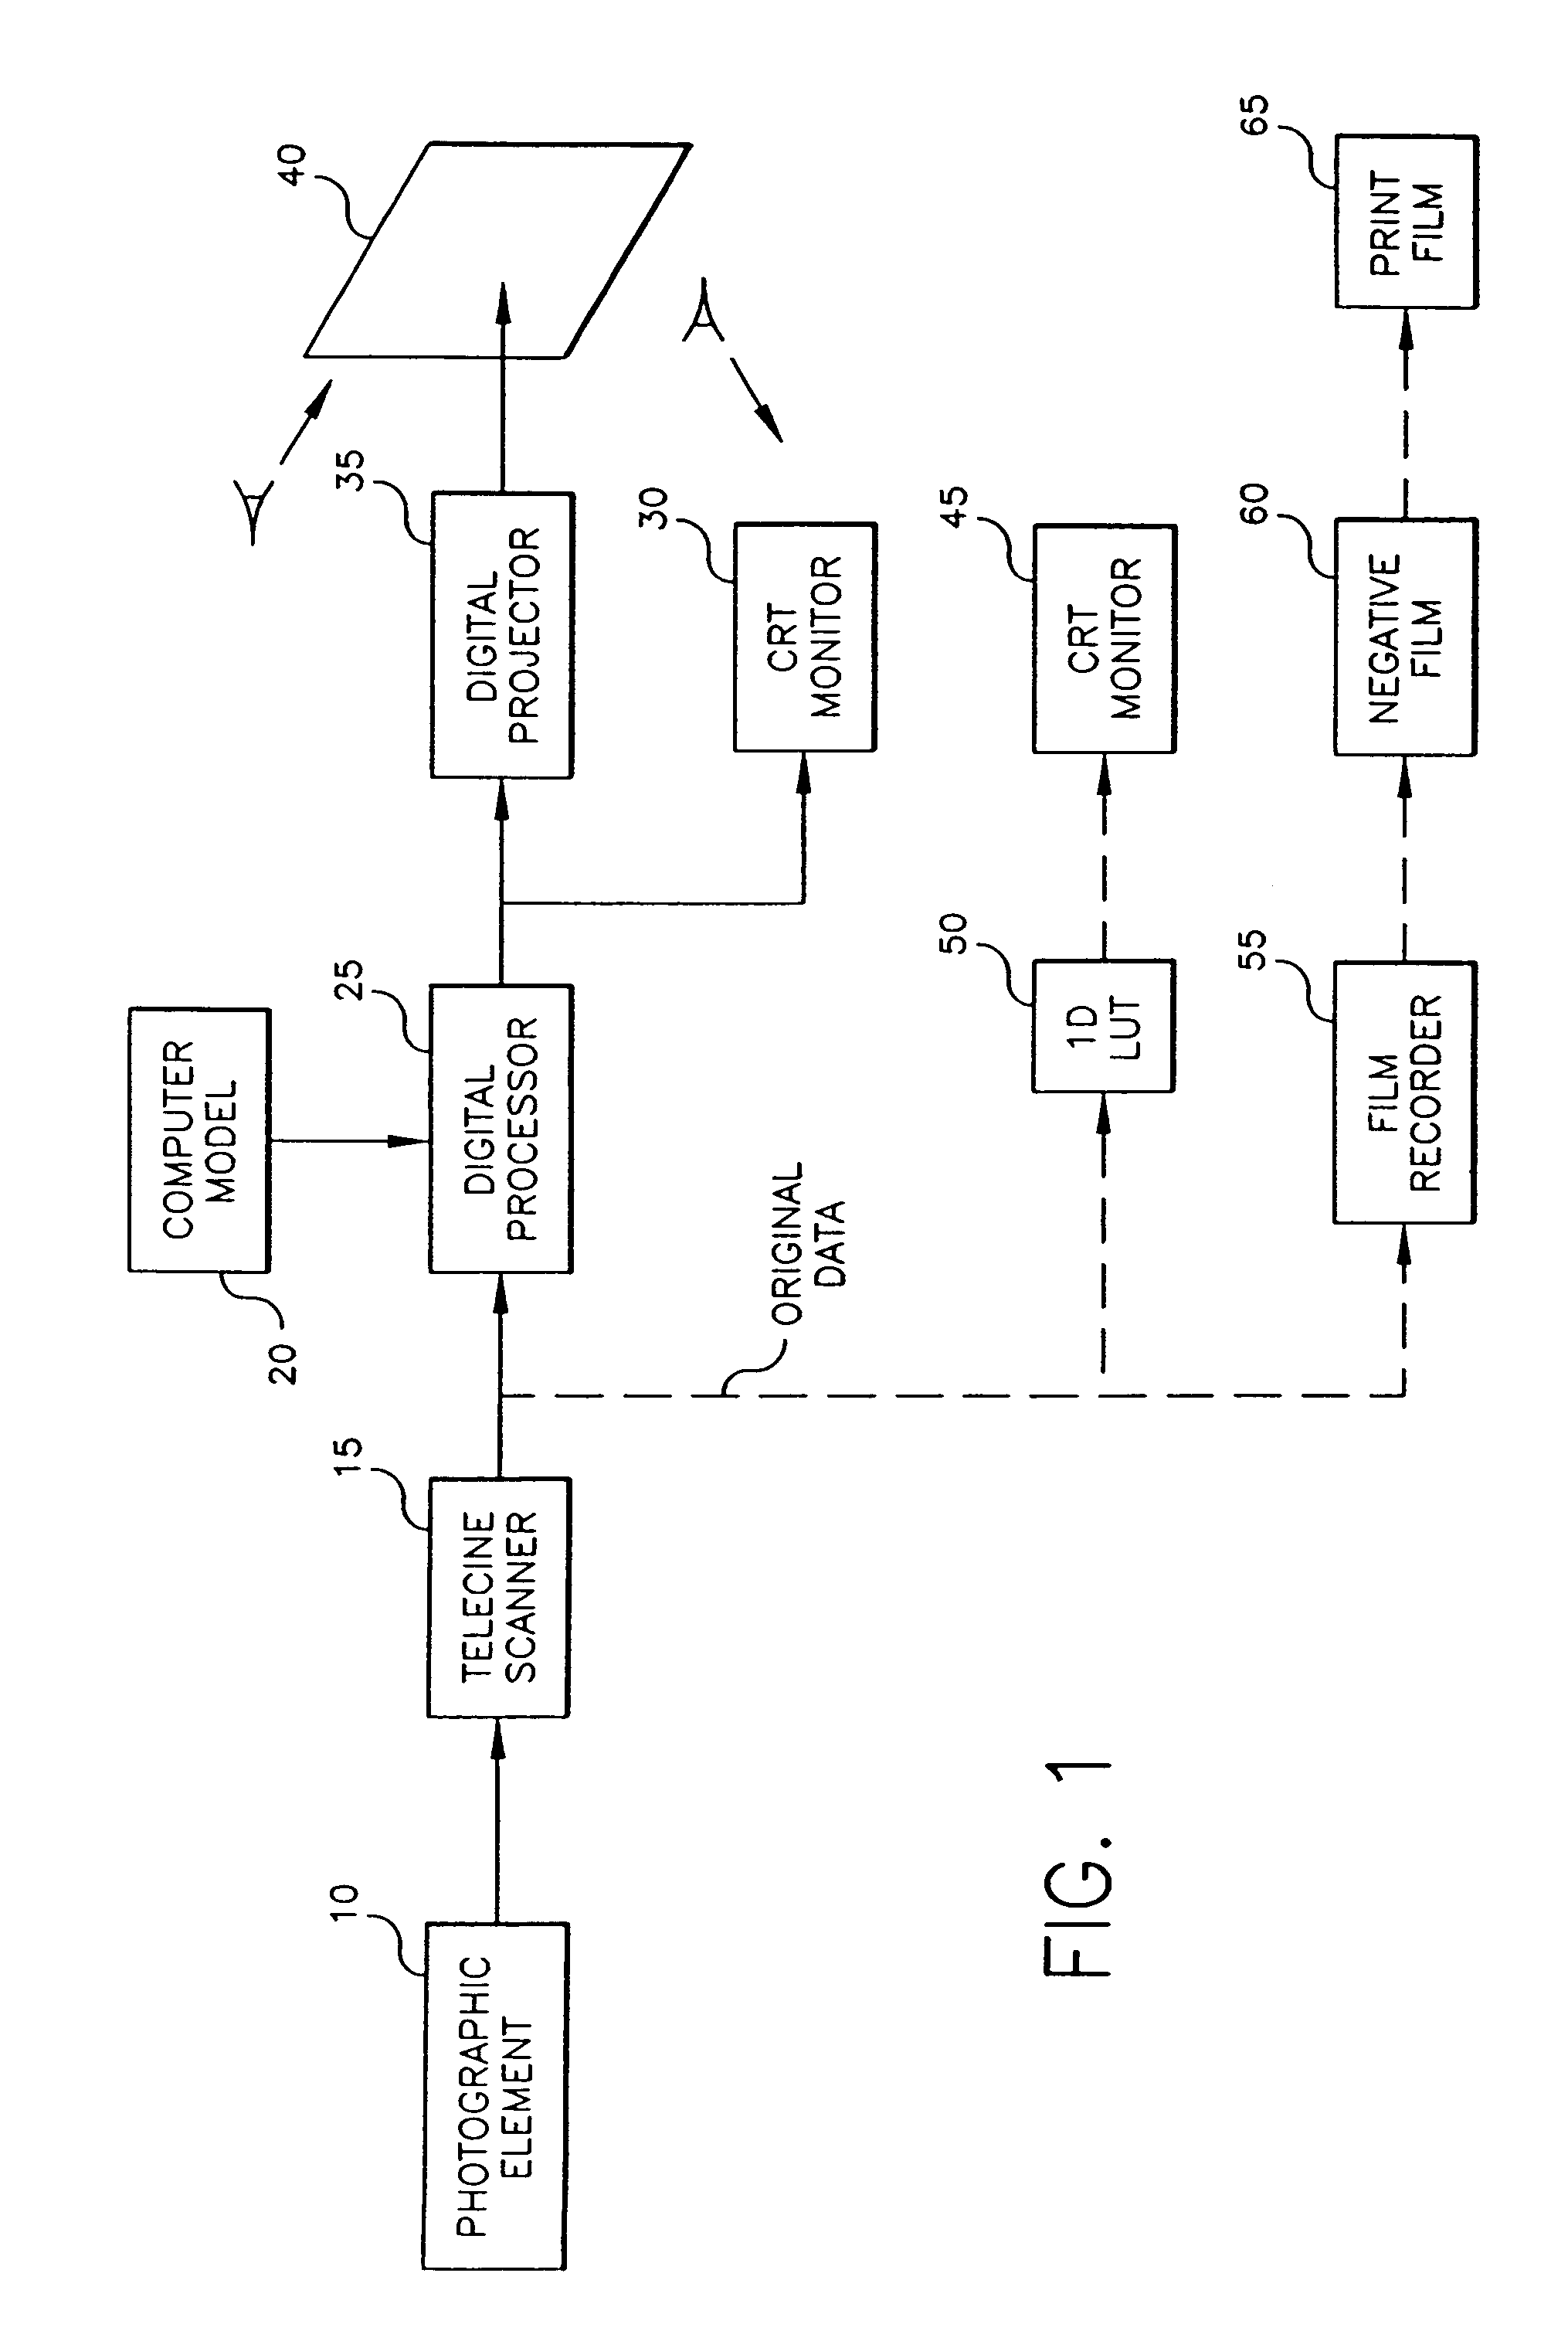 Method of digital processing for digital cinema projection of tone scale and color